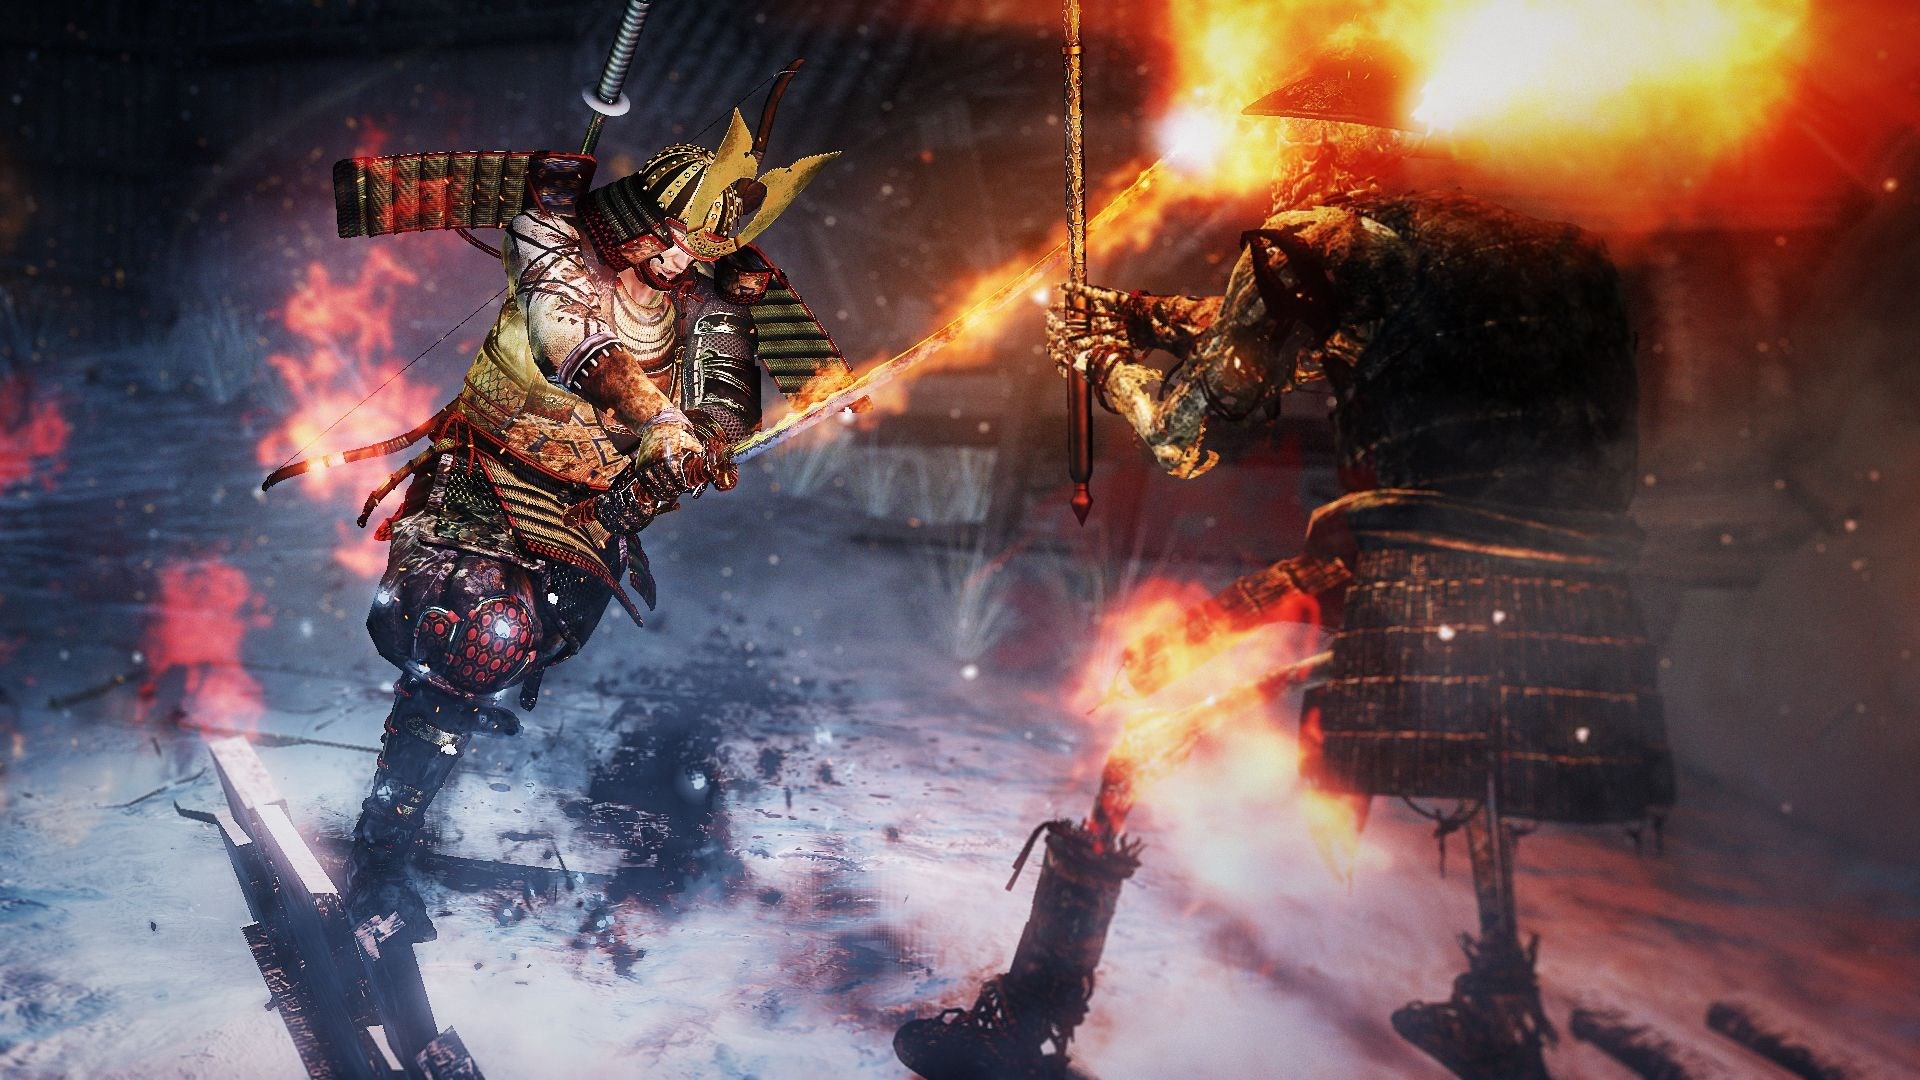 1920x1080 Px Nioh Image 1080p High Quality By Grayling Blare 1920x1080